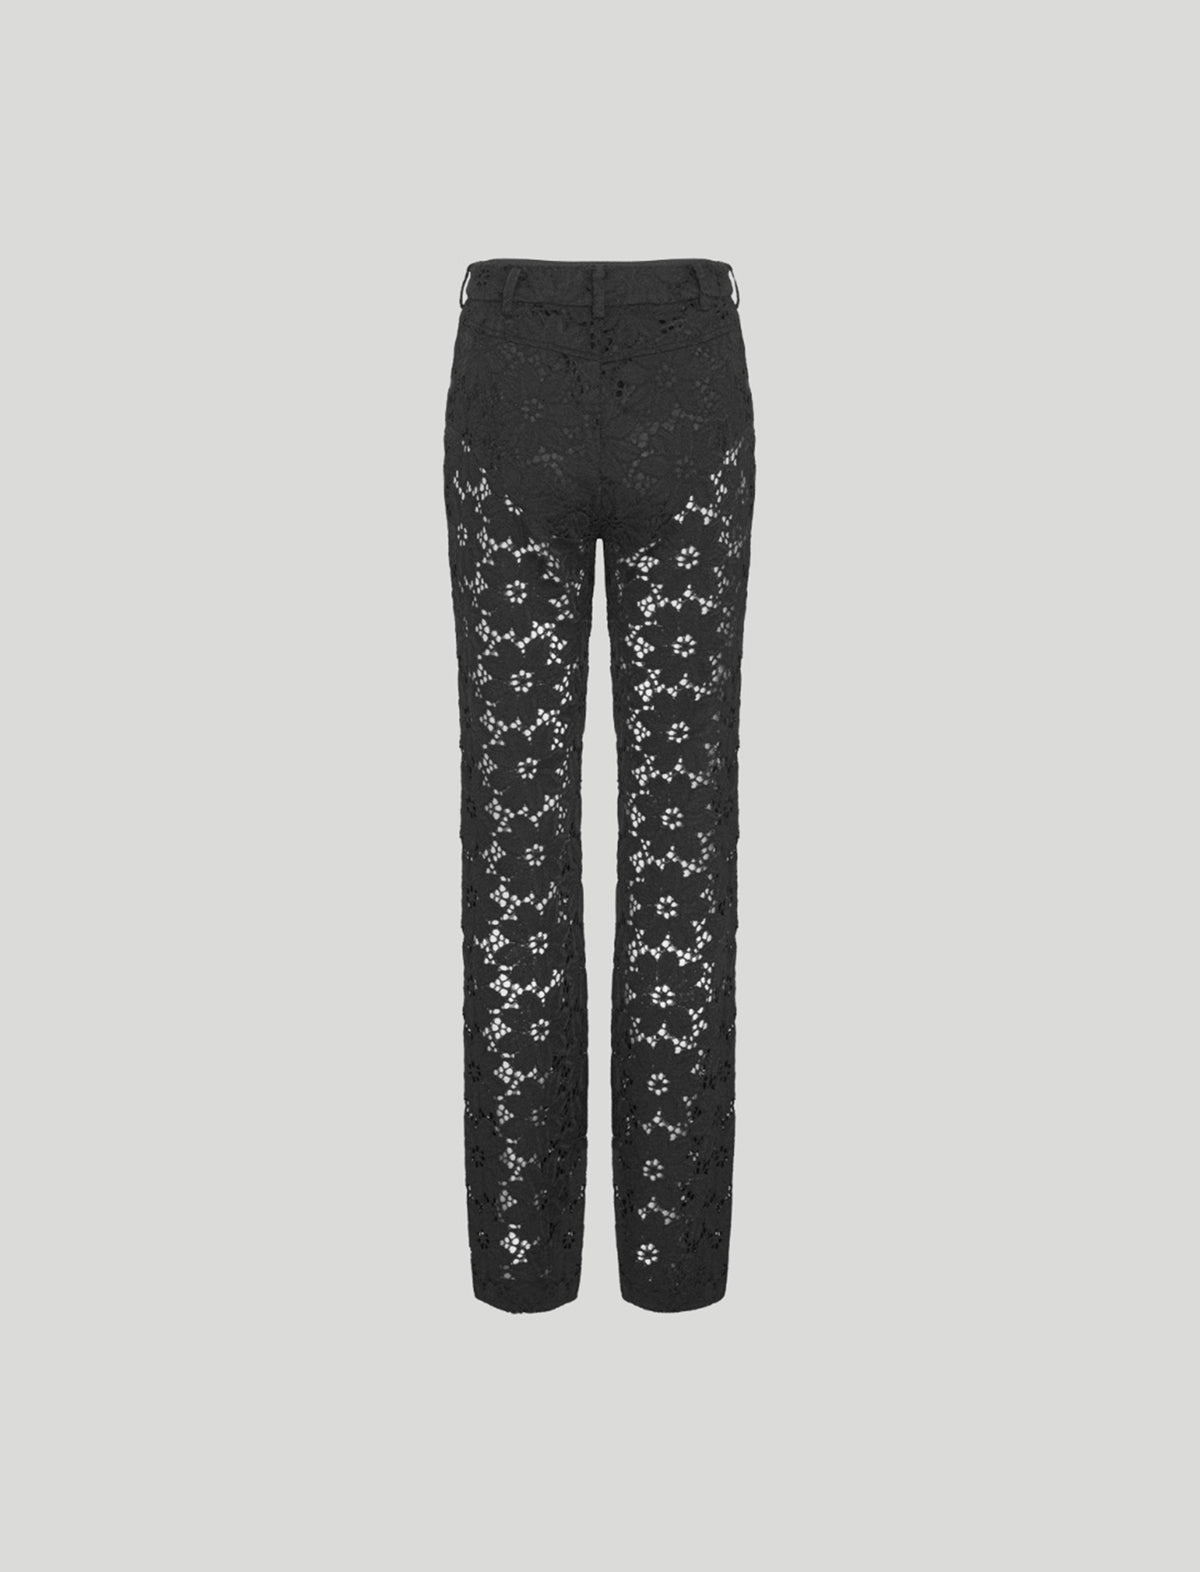 ROTATE BIRGER CHRISTENSEN Heavy Lace Pants in Black